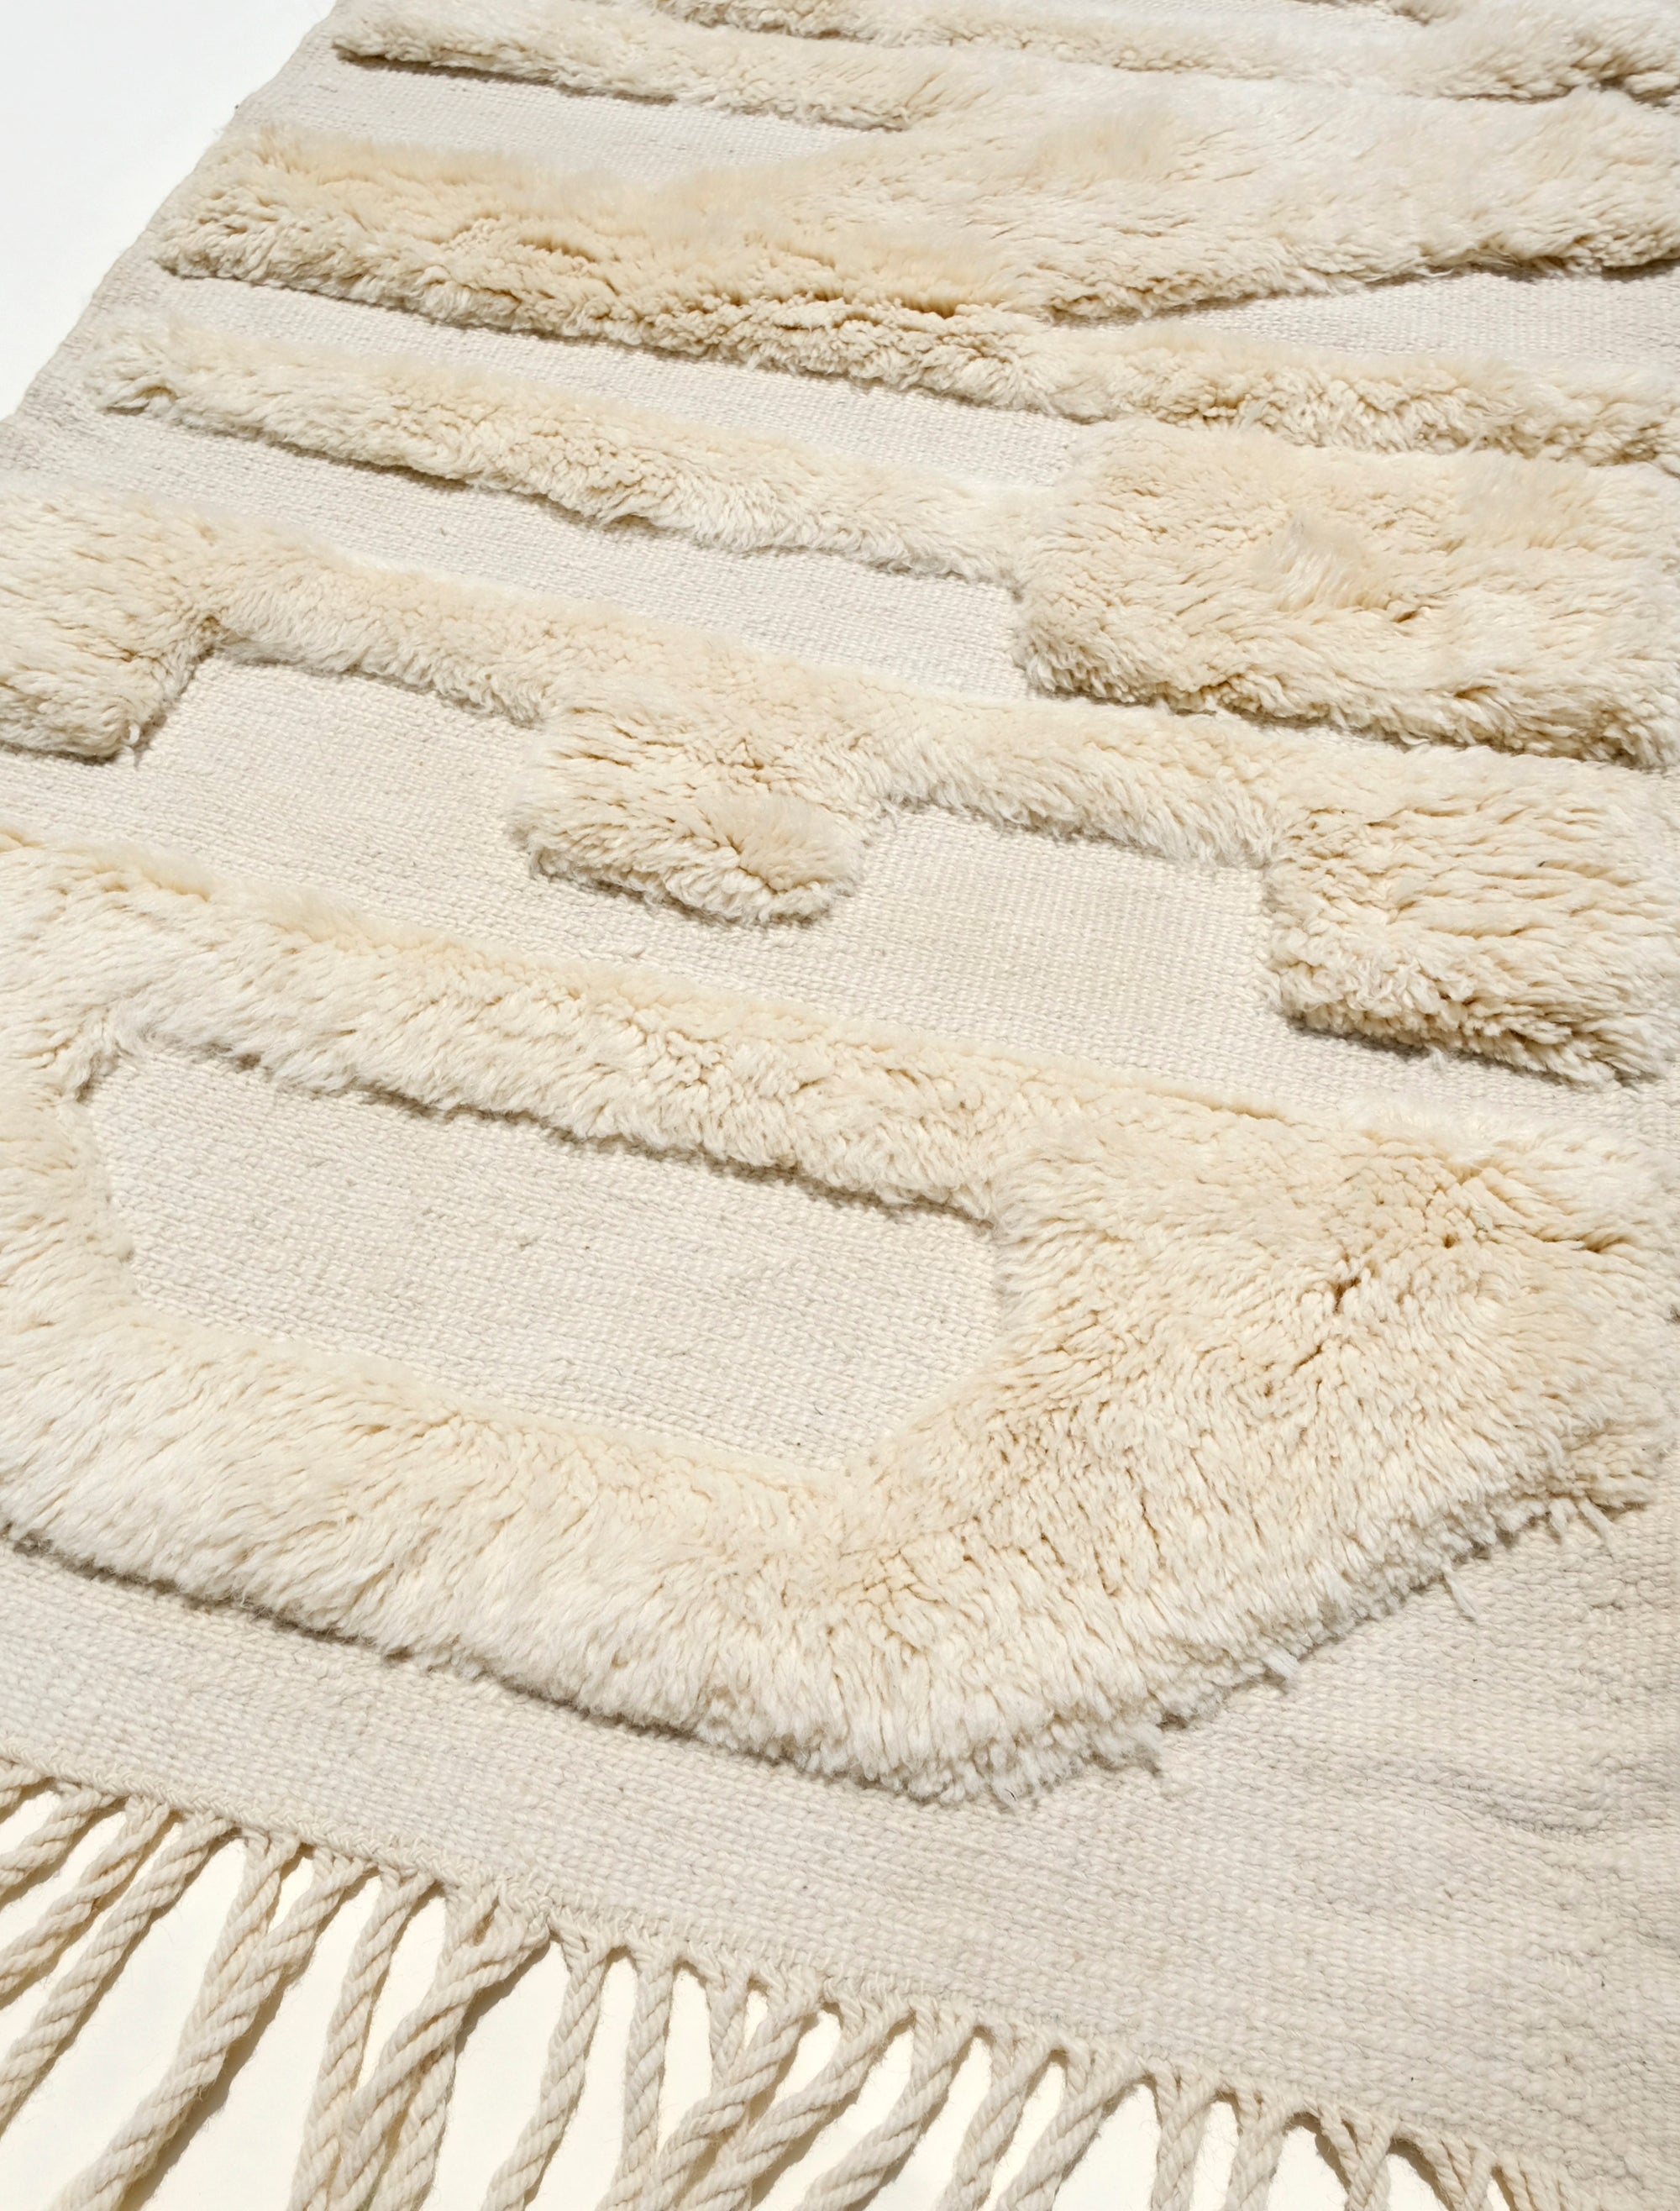 "Ivory Whispers Wanted Rug" is the epitome of sophistication and positivity. Handcrafted from luxurious ivory yarn, this rug features the subtle yet impactful message of 'WANTED' in soft, fuzzy lettering. The flat weaving base provides a cozy and timeless feel, making it a perfect addition to any space. Bring a touch of elegance and a dash of inspiration to your home with this classic ivory rug that delivers a positive message.